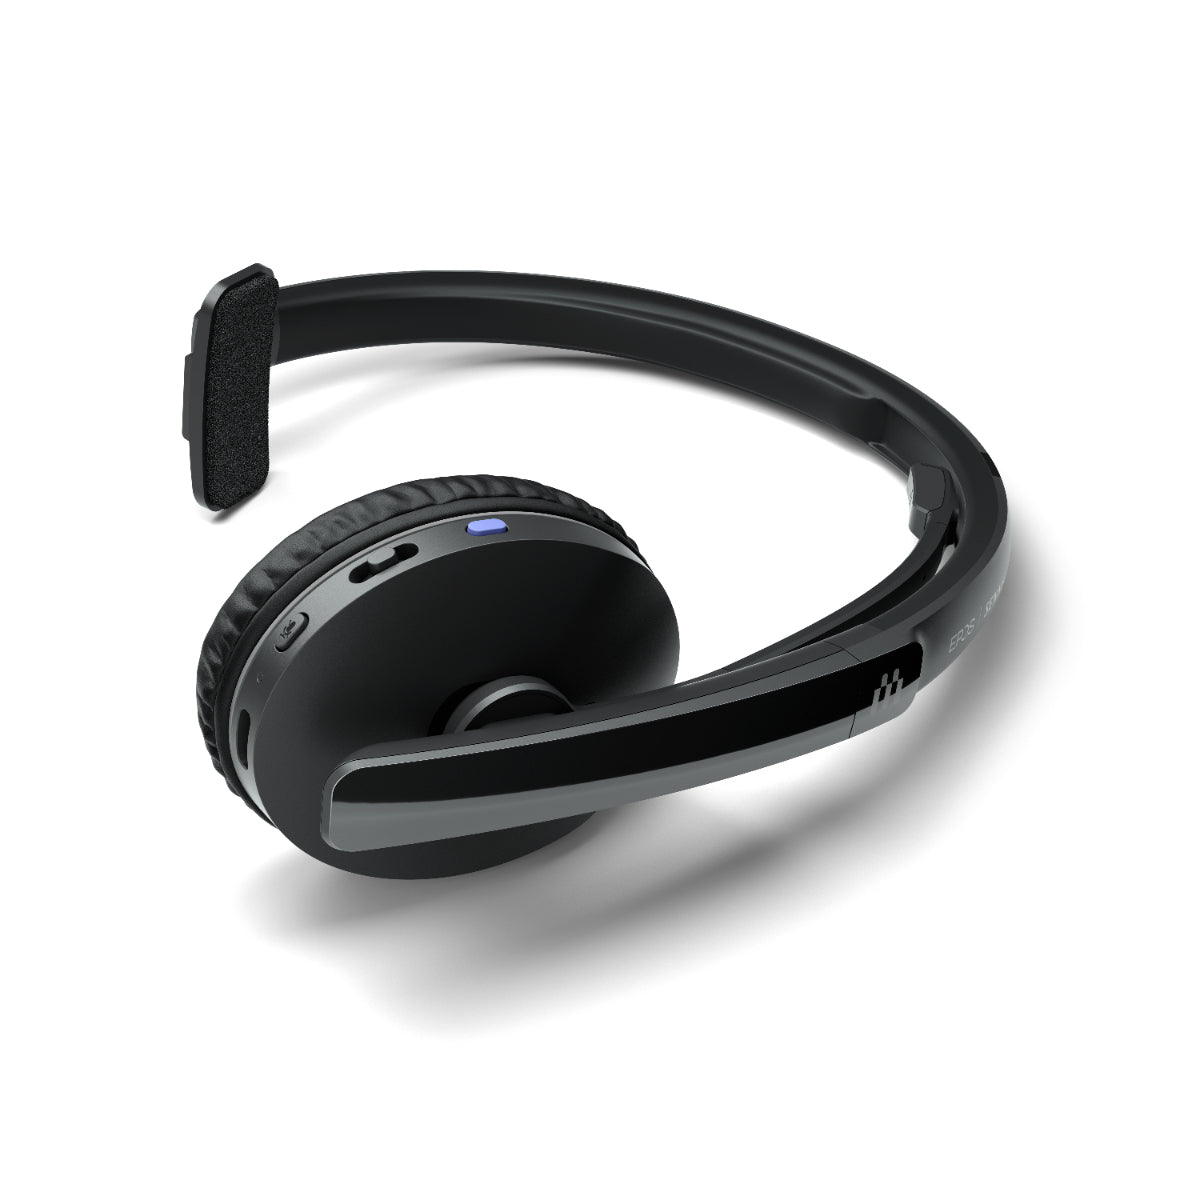 EPOS ADAPT 231 BT Monaural Headset, On-ear, MS Teams Certified, With USB-C Dongle & Case